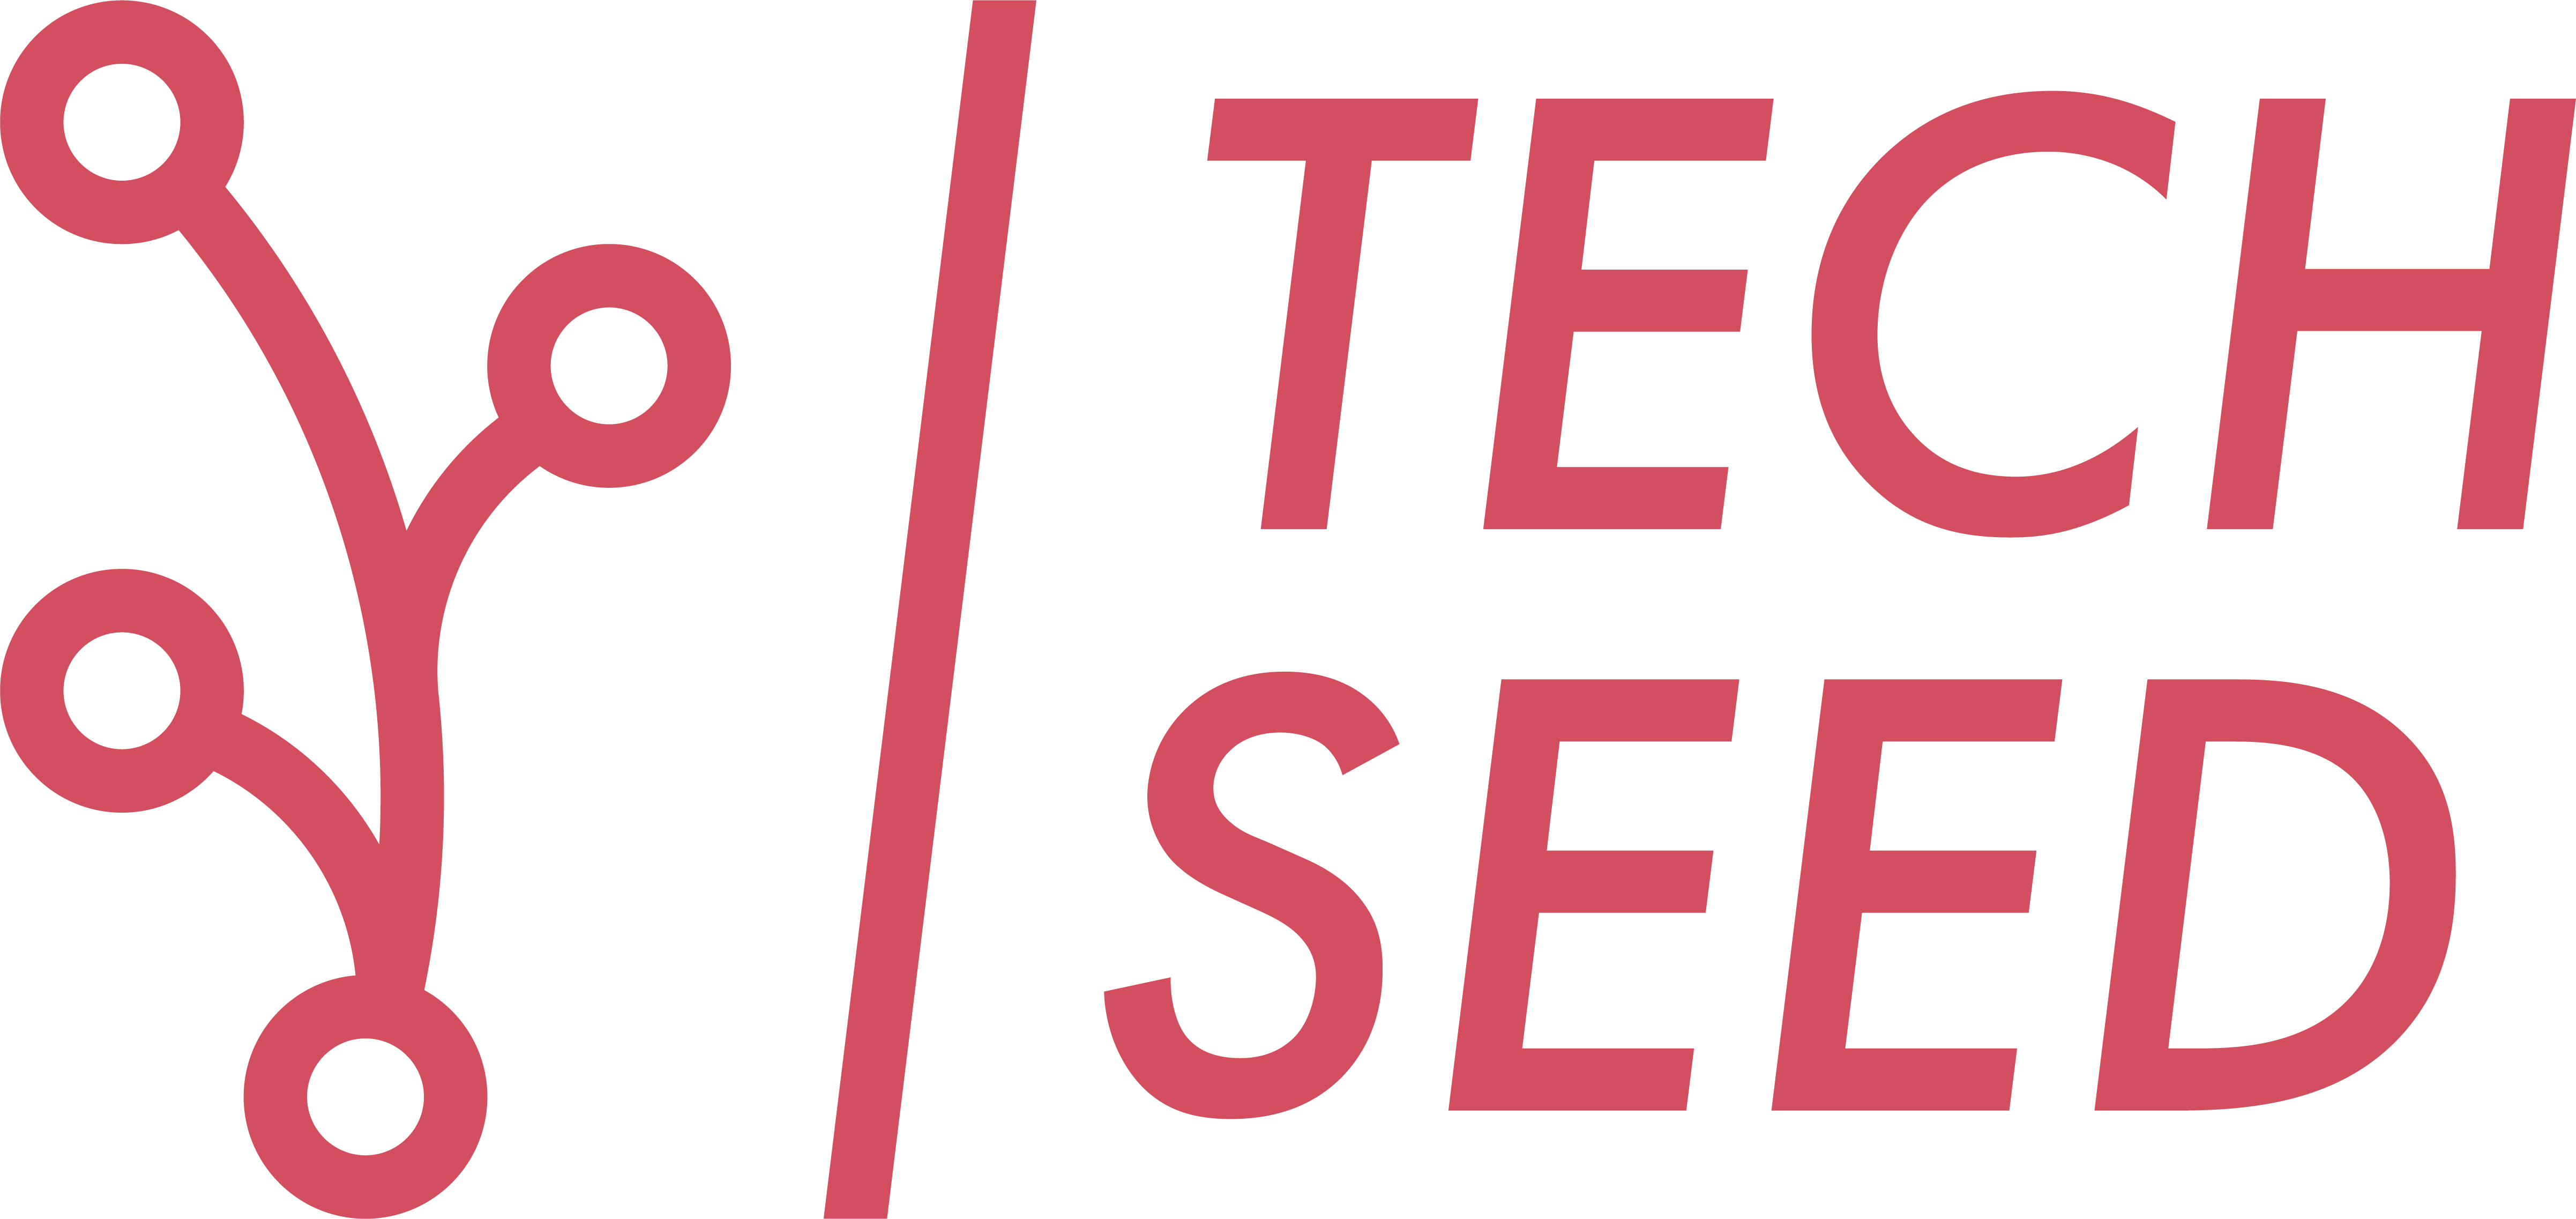 Techseed S.R.L.